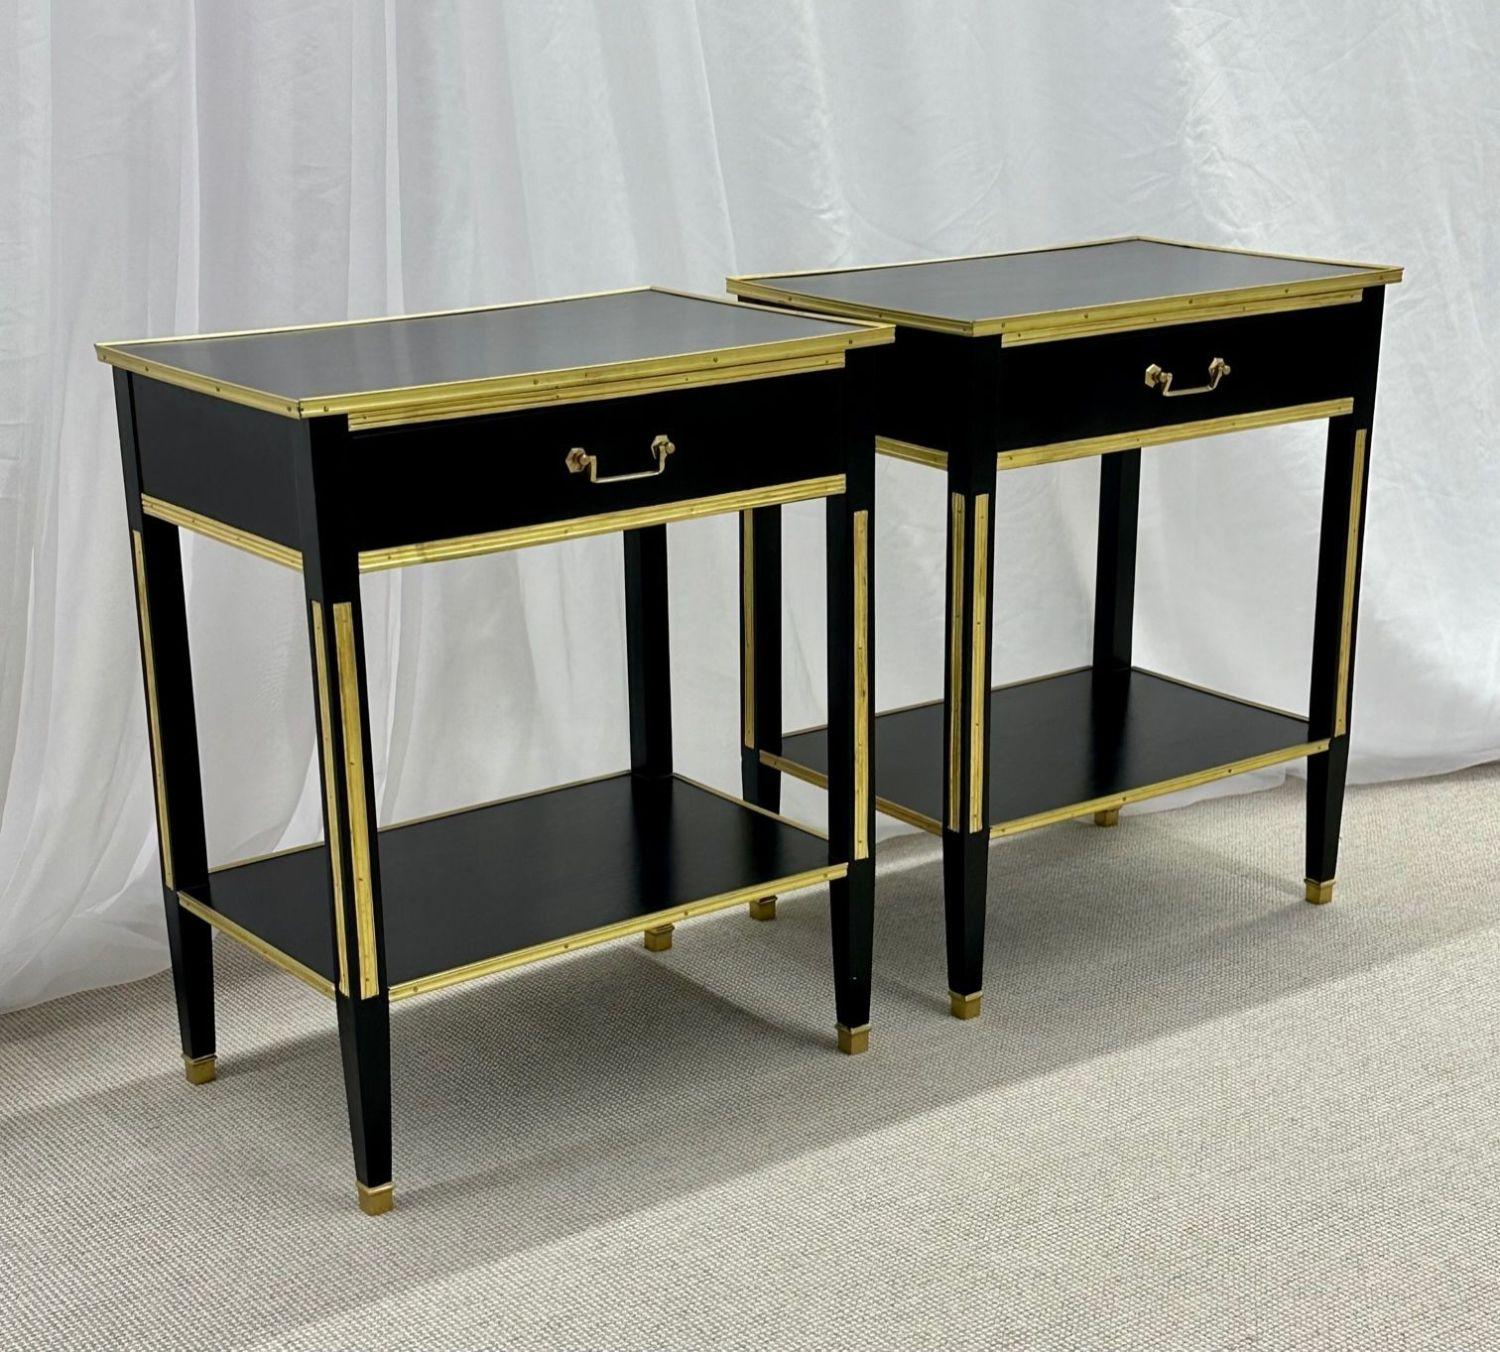 Pair of Ebony End / Side Tables, Night Tables, Maison Jansen Style, Hollywood In Good Condition For Sale In Stamford, CT